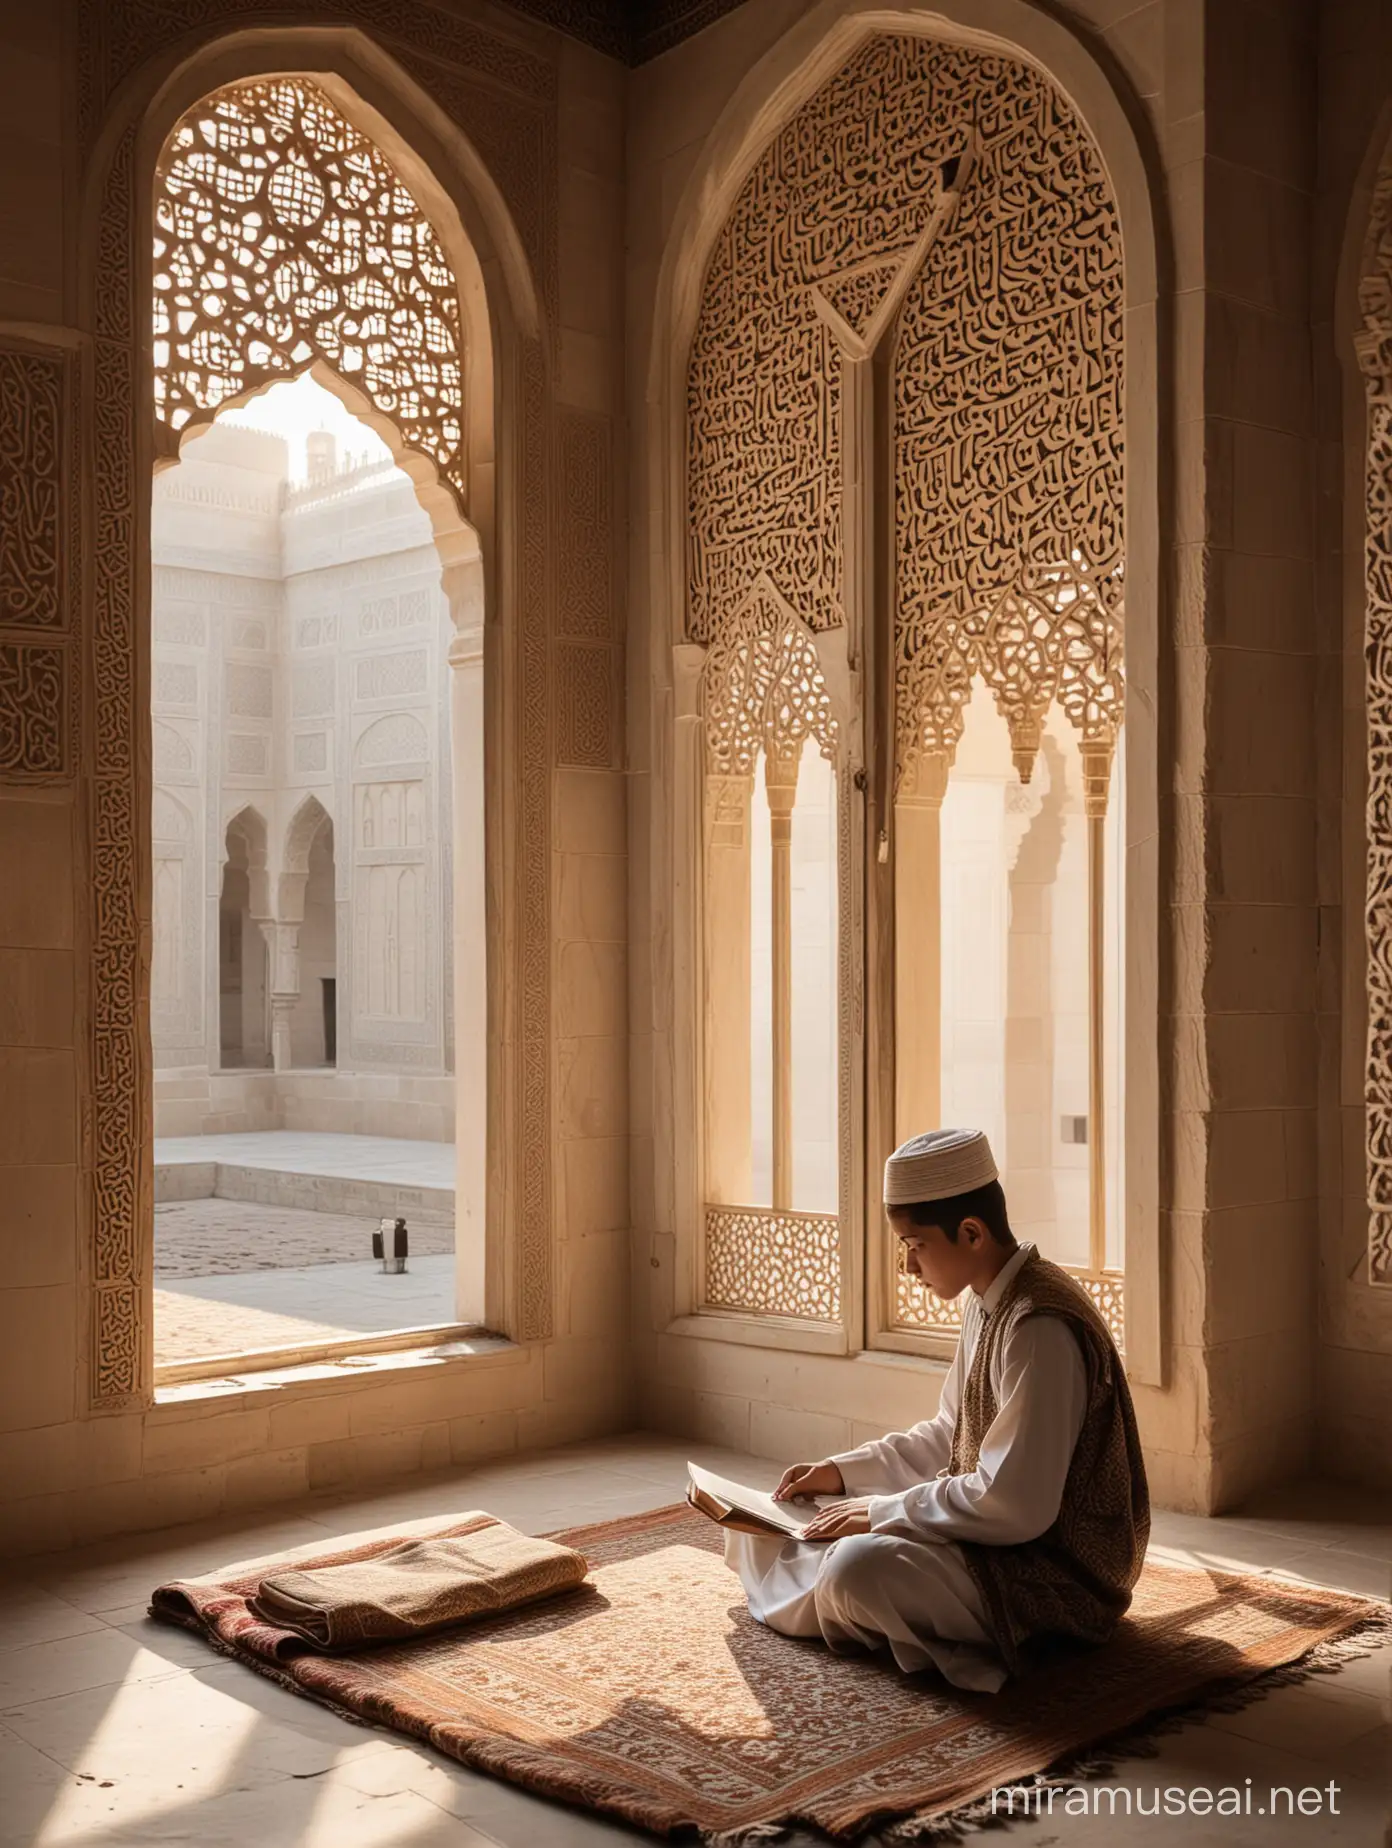 Muslim Boy Reading Quran in Early Morning Light at 12th Century Mosque